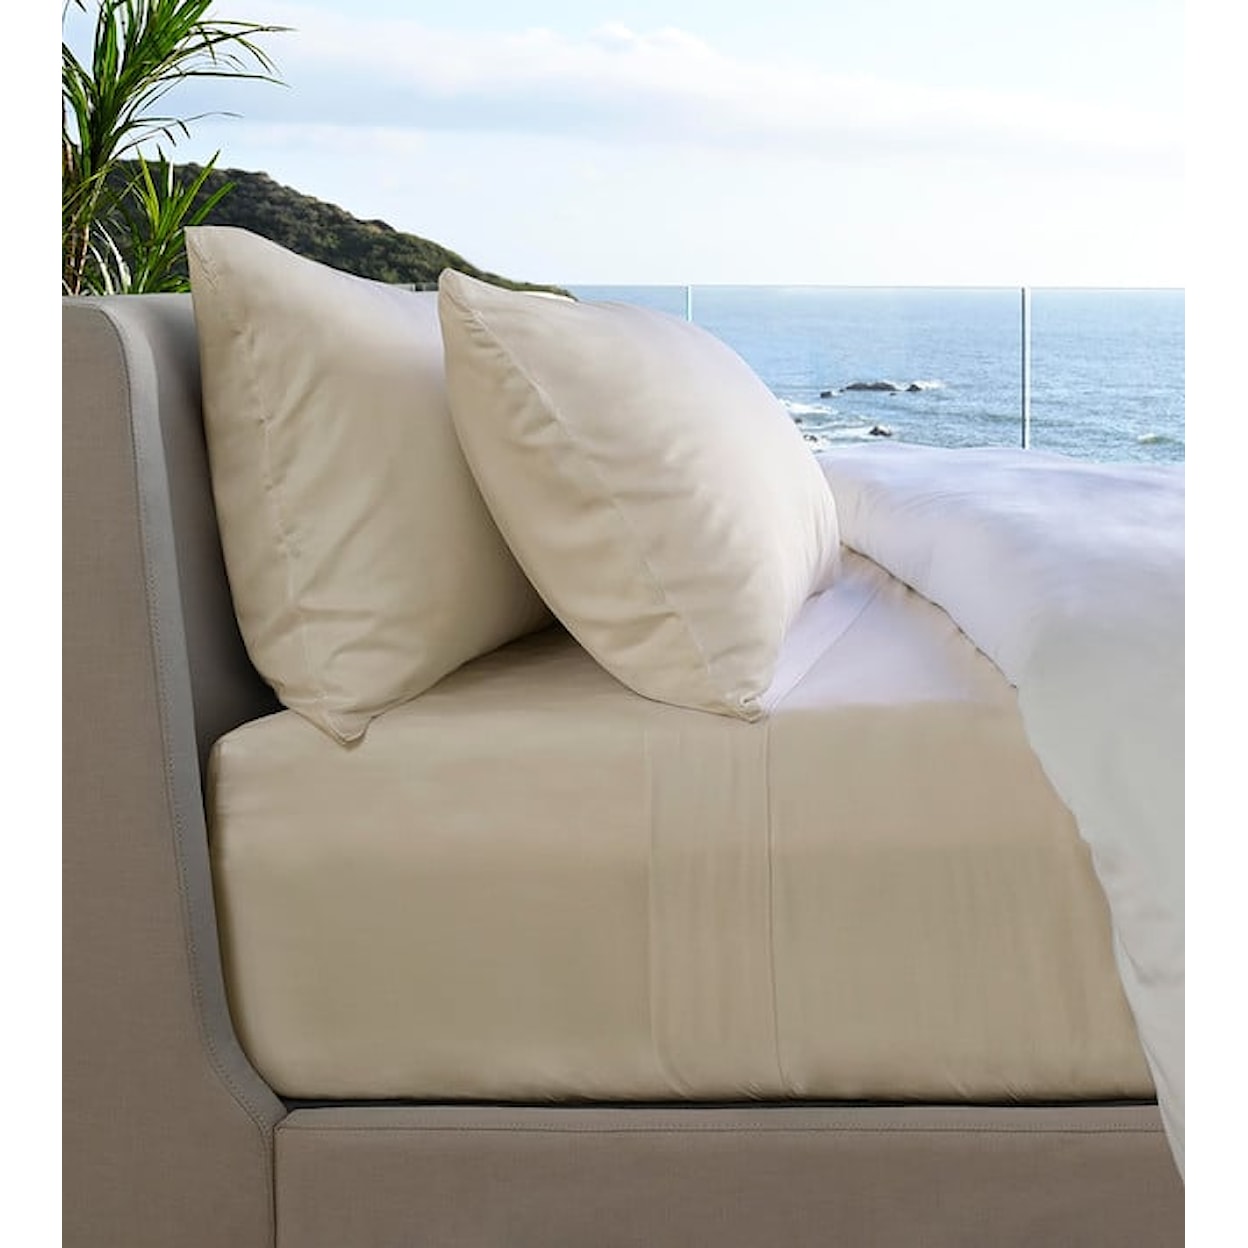 Cariloha Resort Bamboo Bed Sheets Queen Resort Bamboo Sheets in Coconut Milk